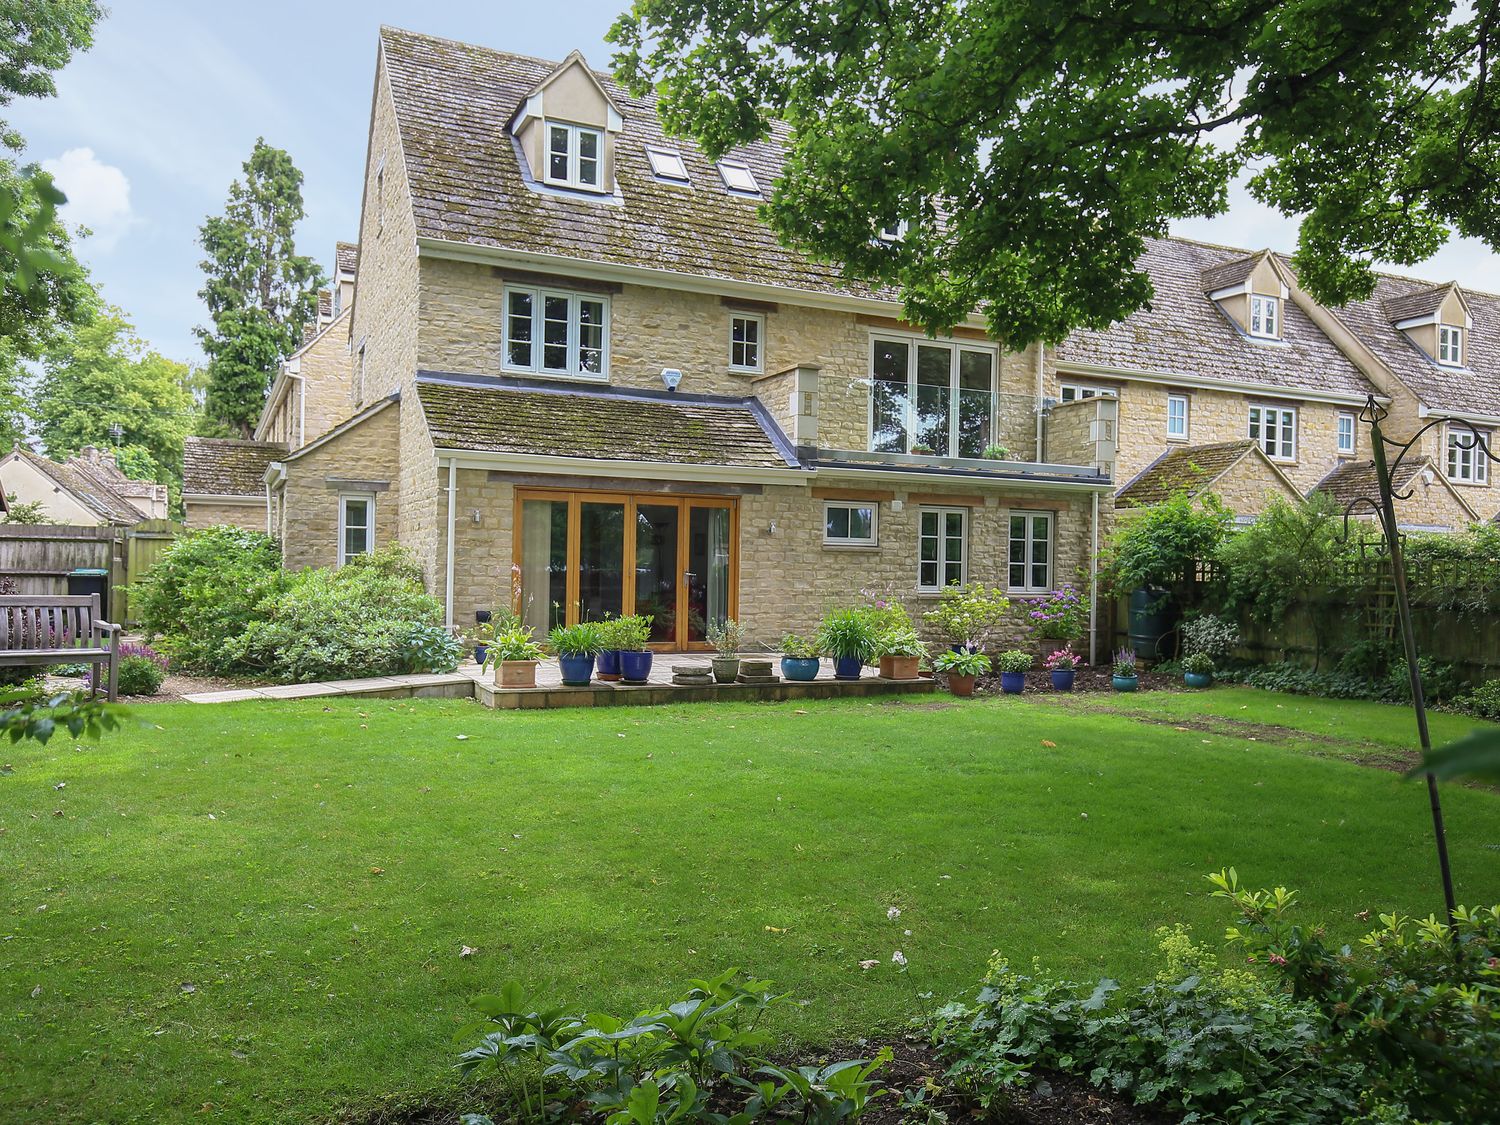 5 Burford Mews - Cotswolds - 988757 - photo 1